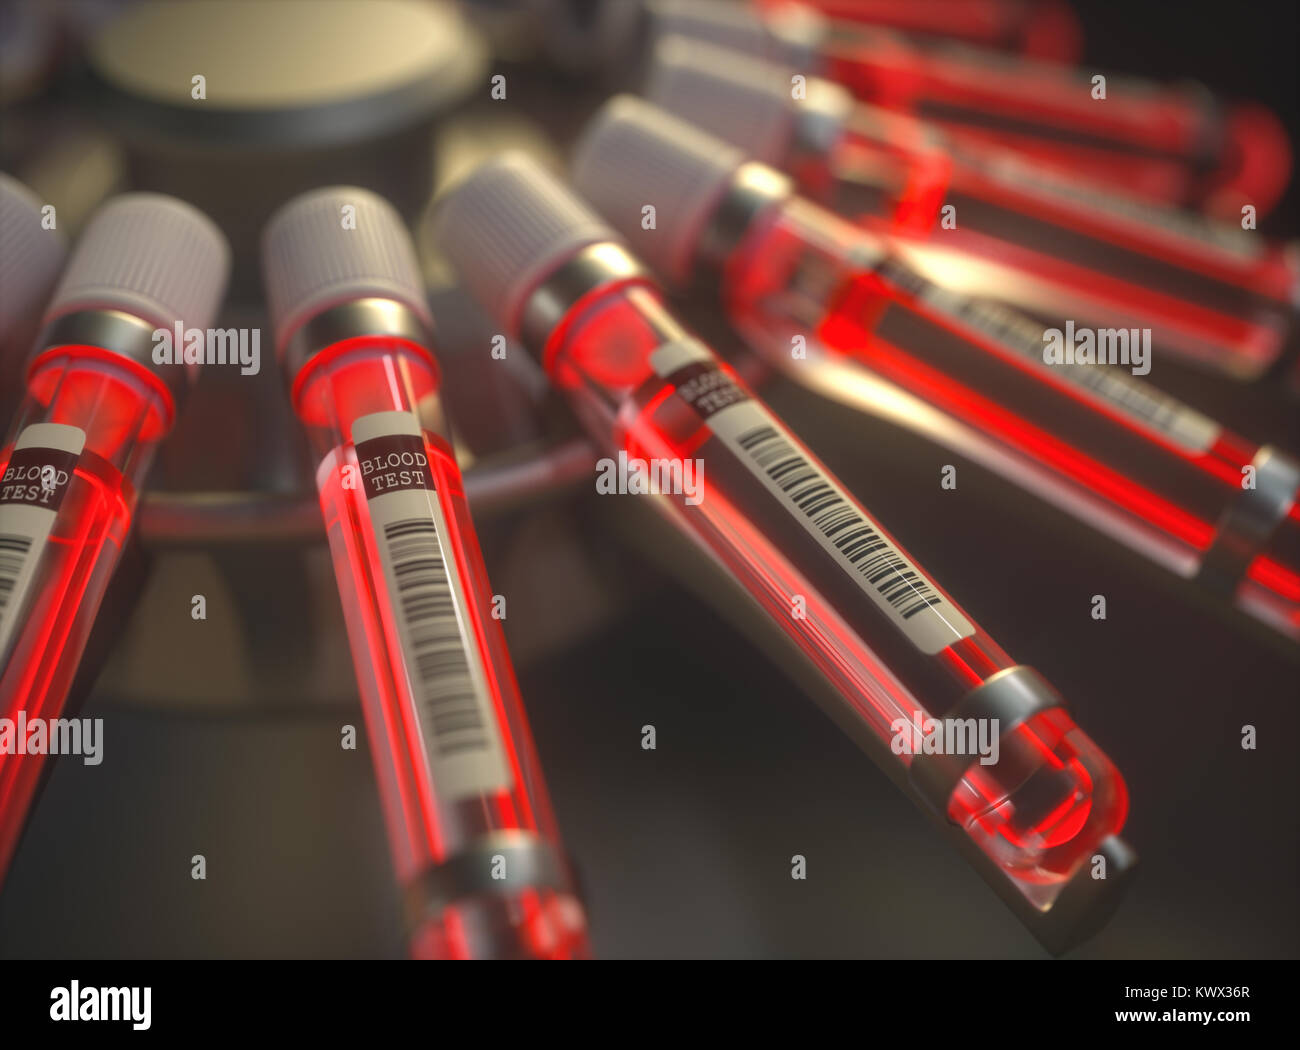 3D illustration. Centrifuge blood machine. Chemical test, bright red liquid inside the test tubes. Stock Photo